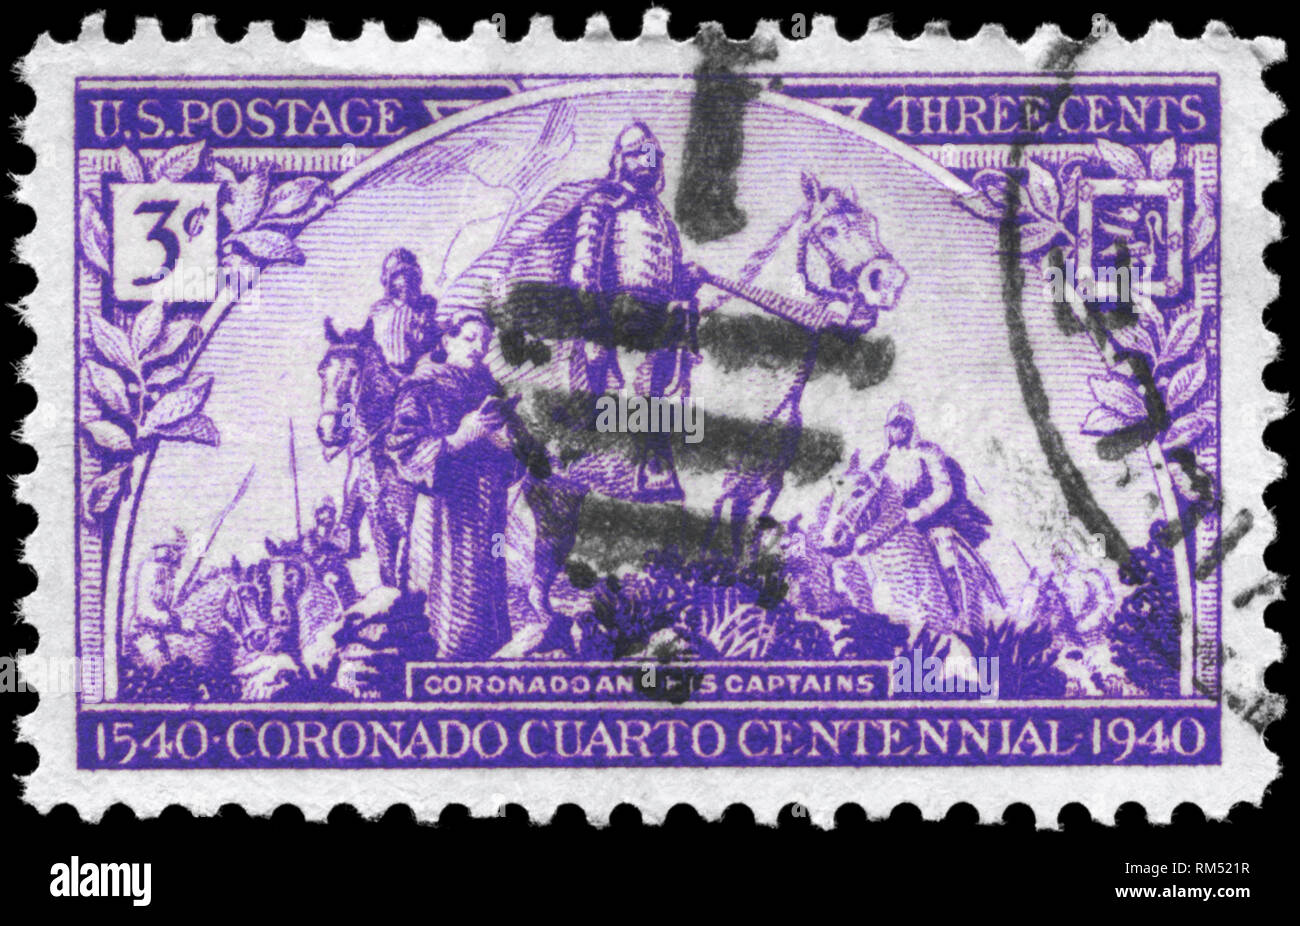 USA - CIRCA 1940: A Stamp printed in USA shows the “Coronado and His Captains”, by Gerald Cassidy, devoted to 400th anniv. of the Coronado Expedition, Stock Photo